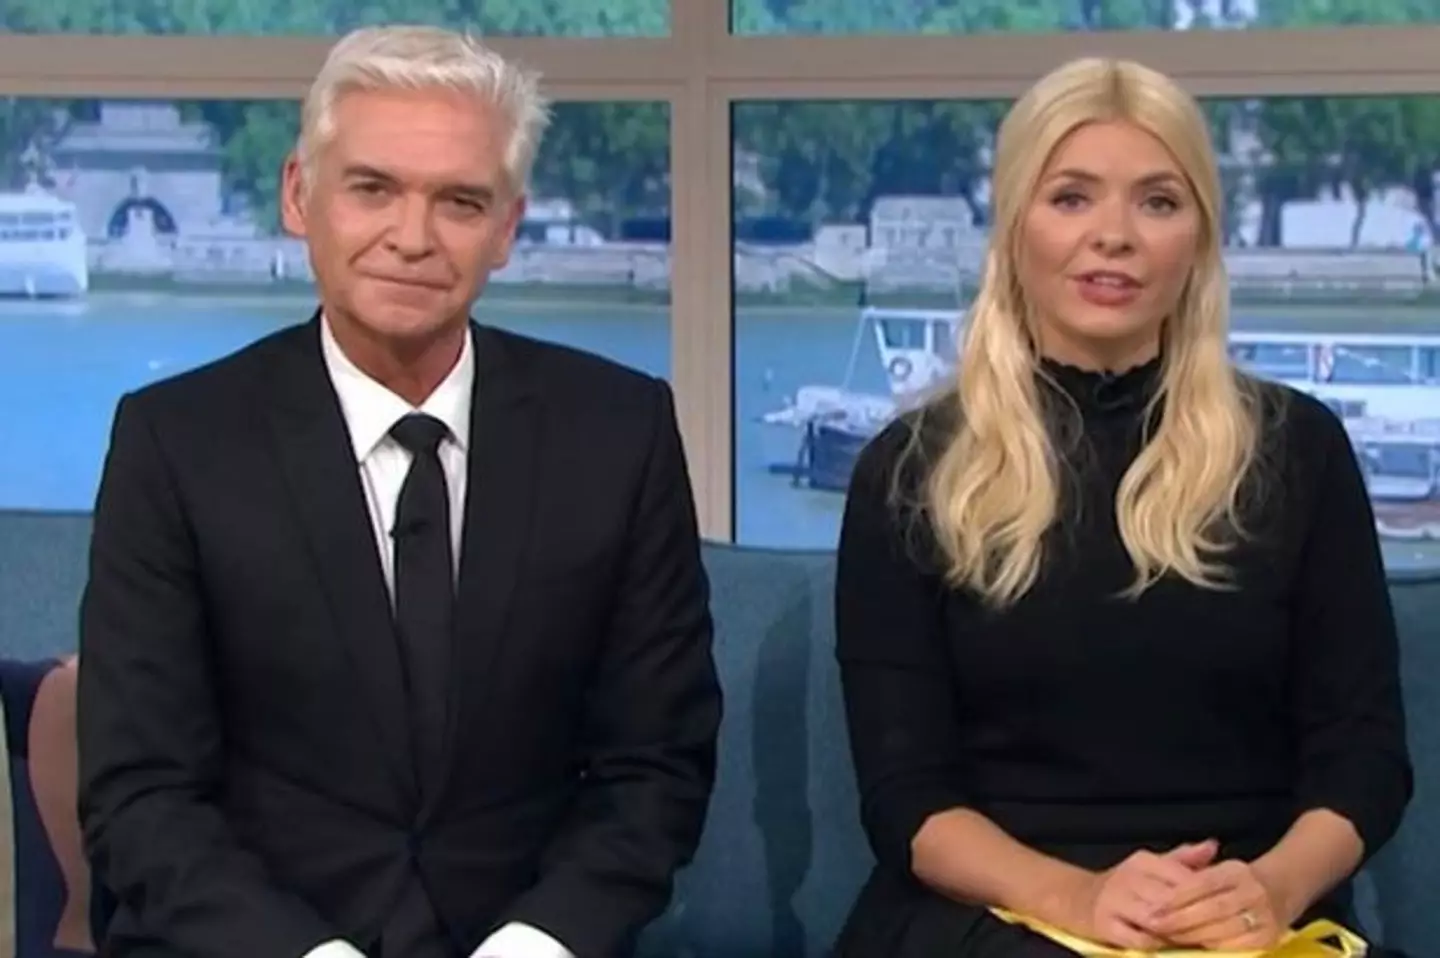 Phillip Schofield and Holly Willoughby were accused of 'skipping' the hours-long queue to see the Queen lying in state.